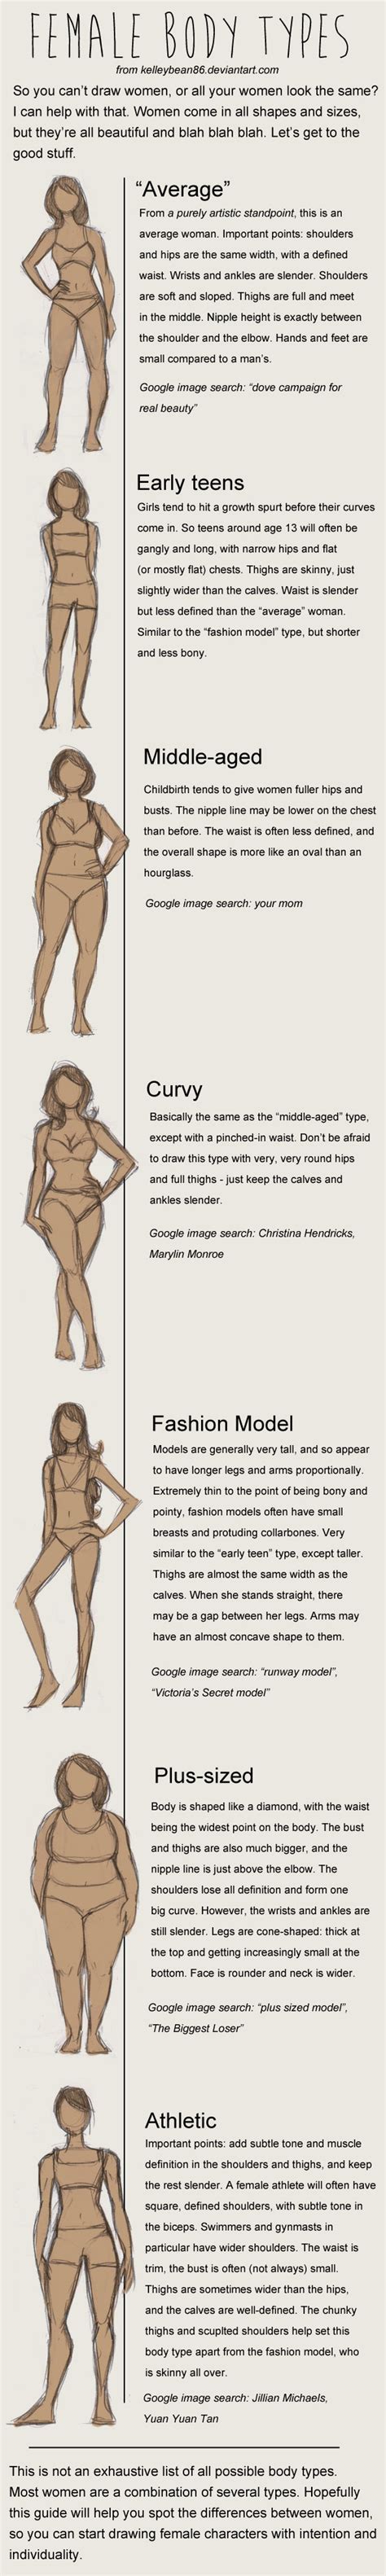 Perceptions surrounding body types and beauty standards vary across culture. Comic Art Reference - Female Body Types